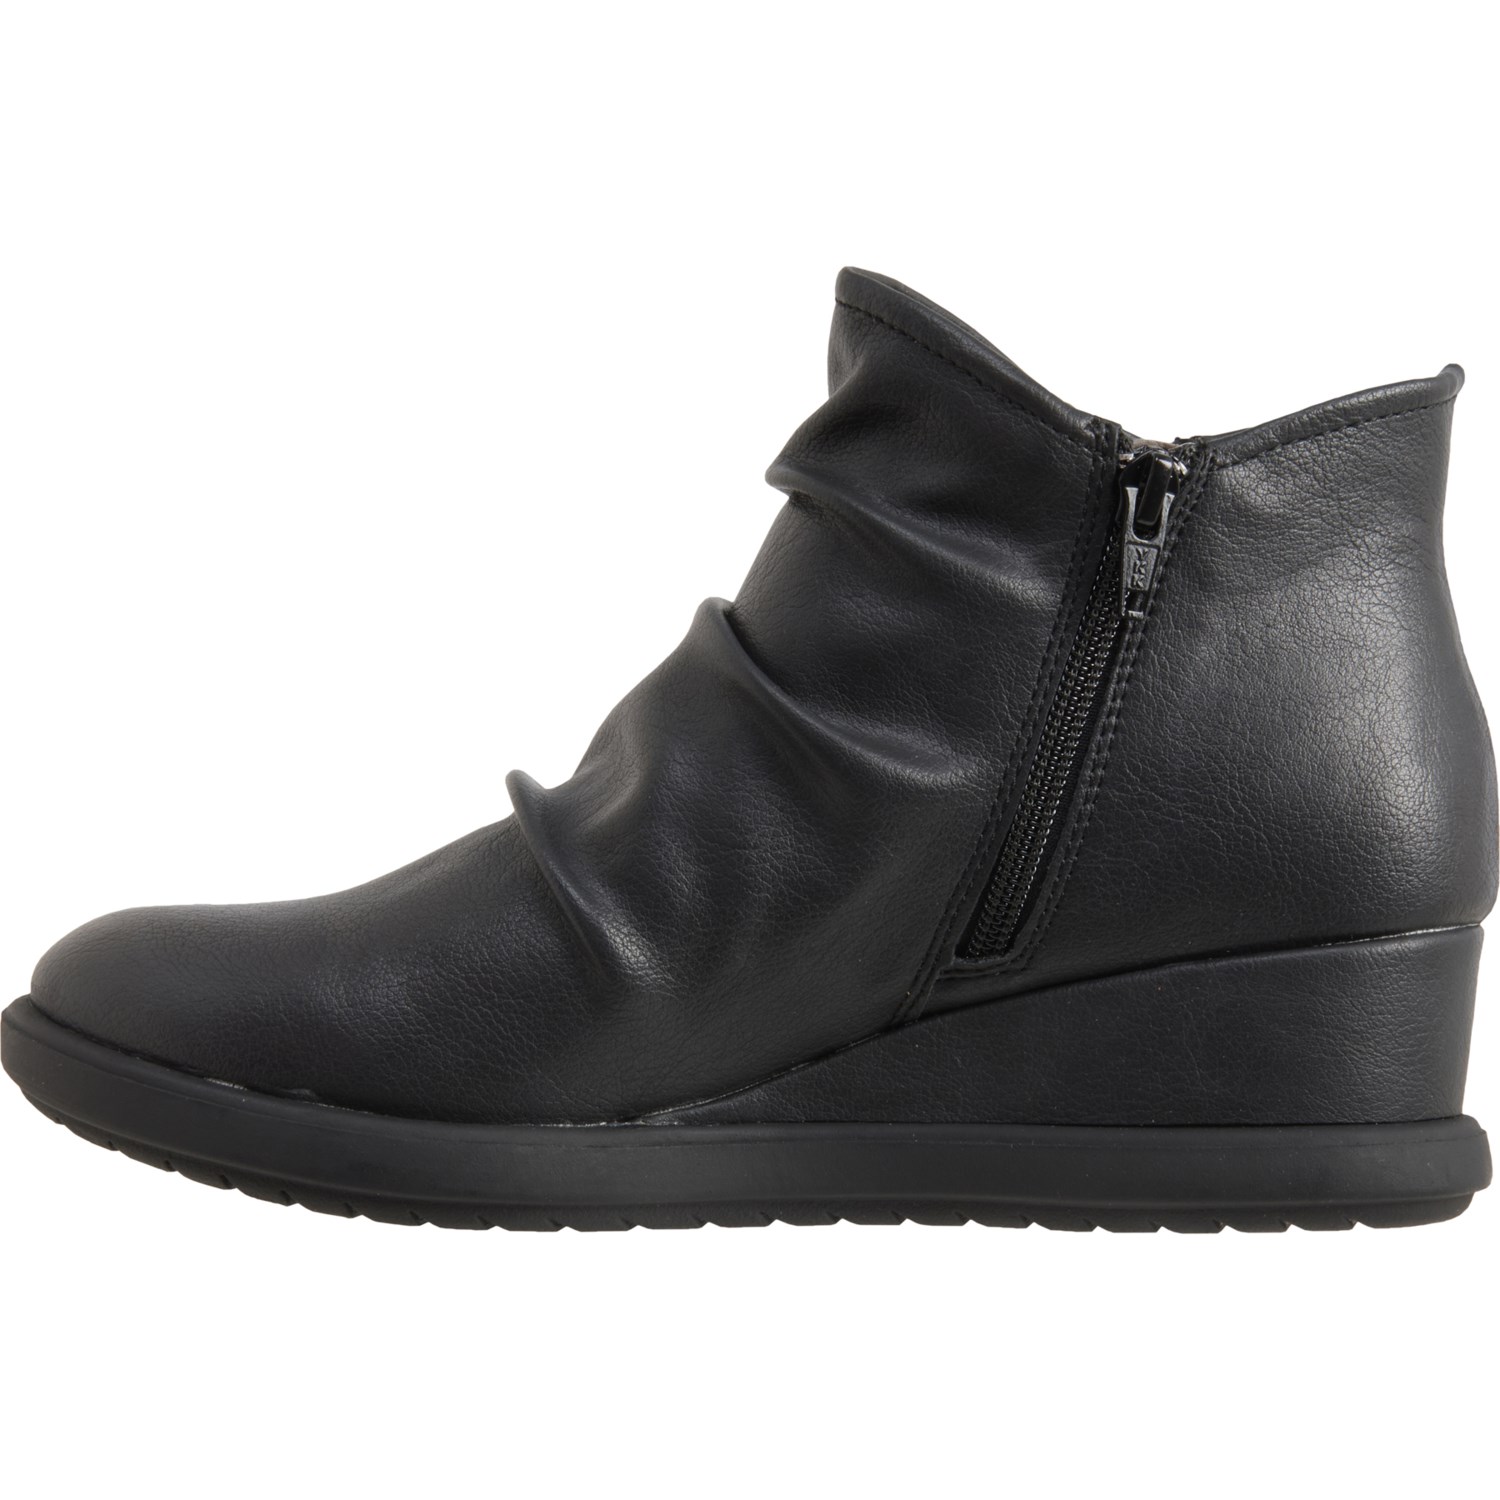 Eurosoft by Sofft Jora Booties (For Women) - Save 33%